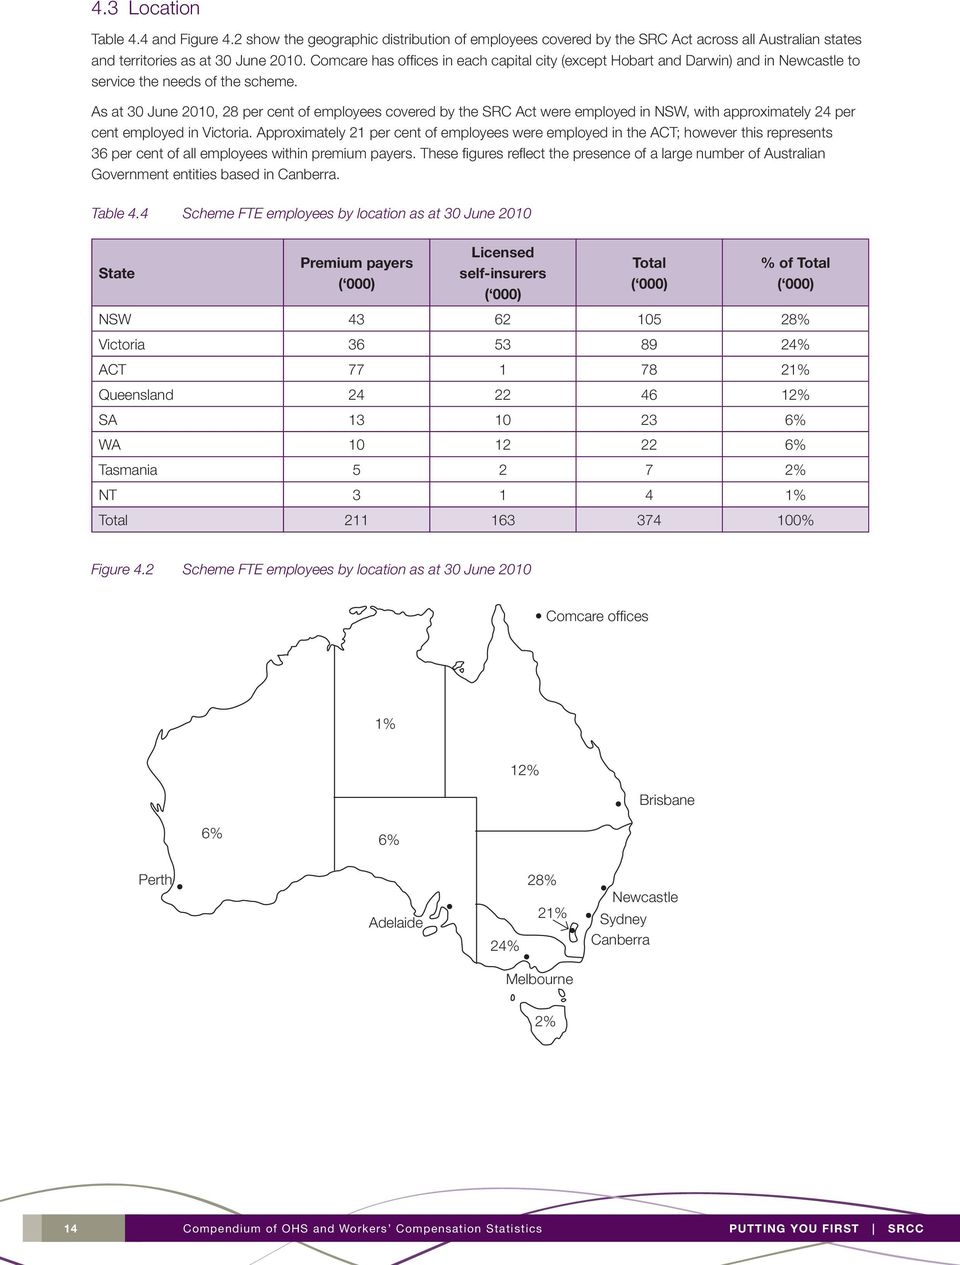 As at 30 June 2010, 28 per cent of employees covered by the SRC Act were employed in NSW, with approximately 24 per cent employed in Victoria.